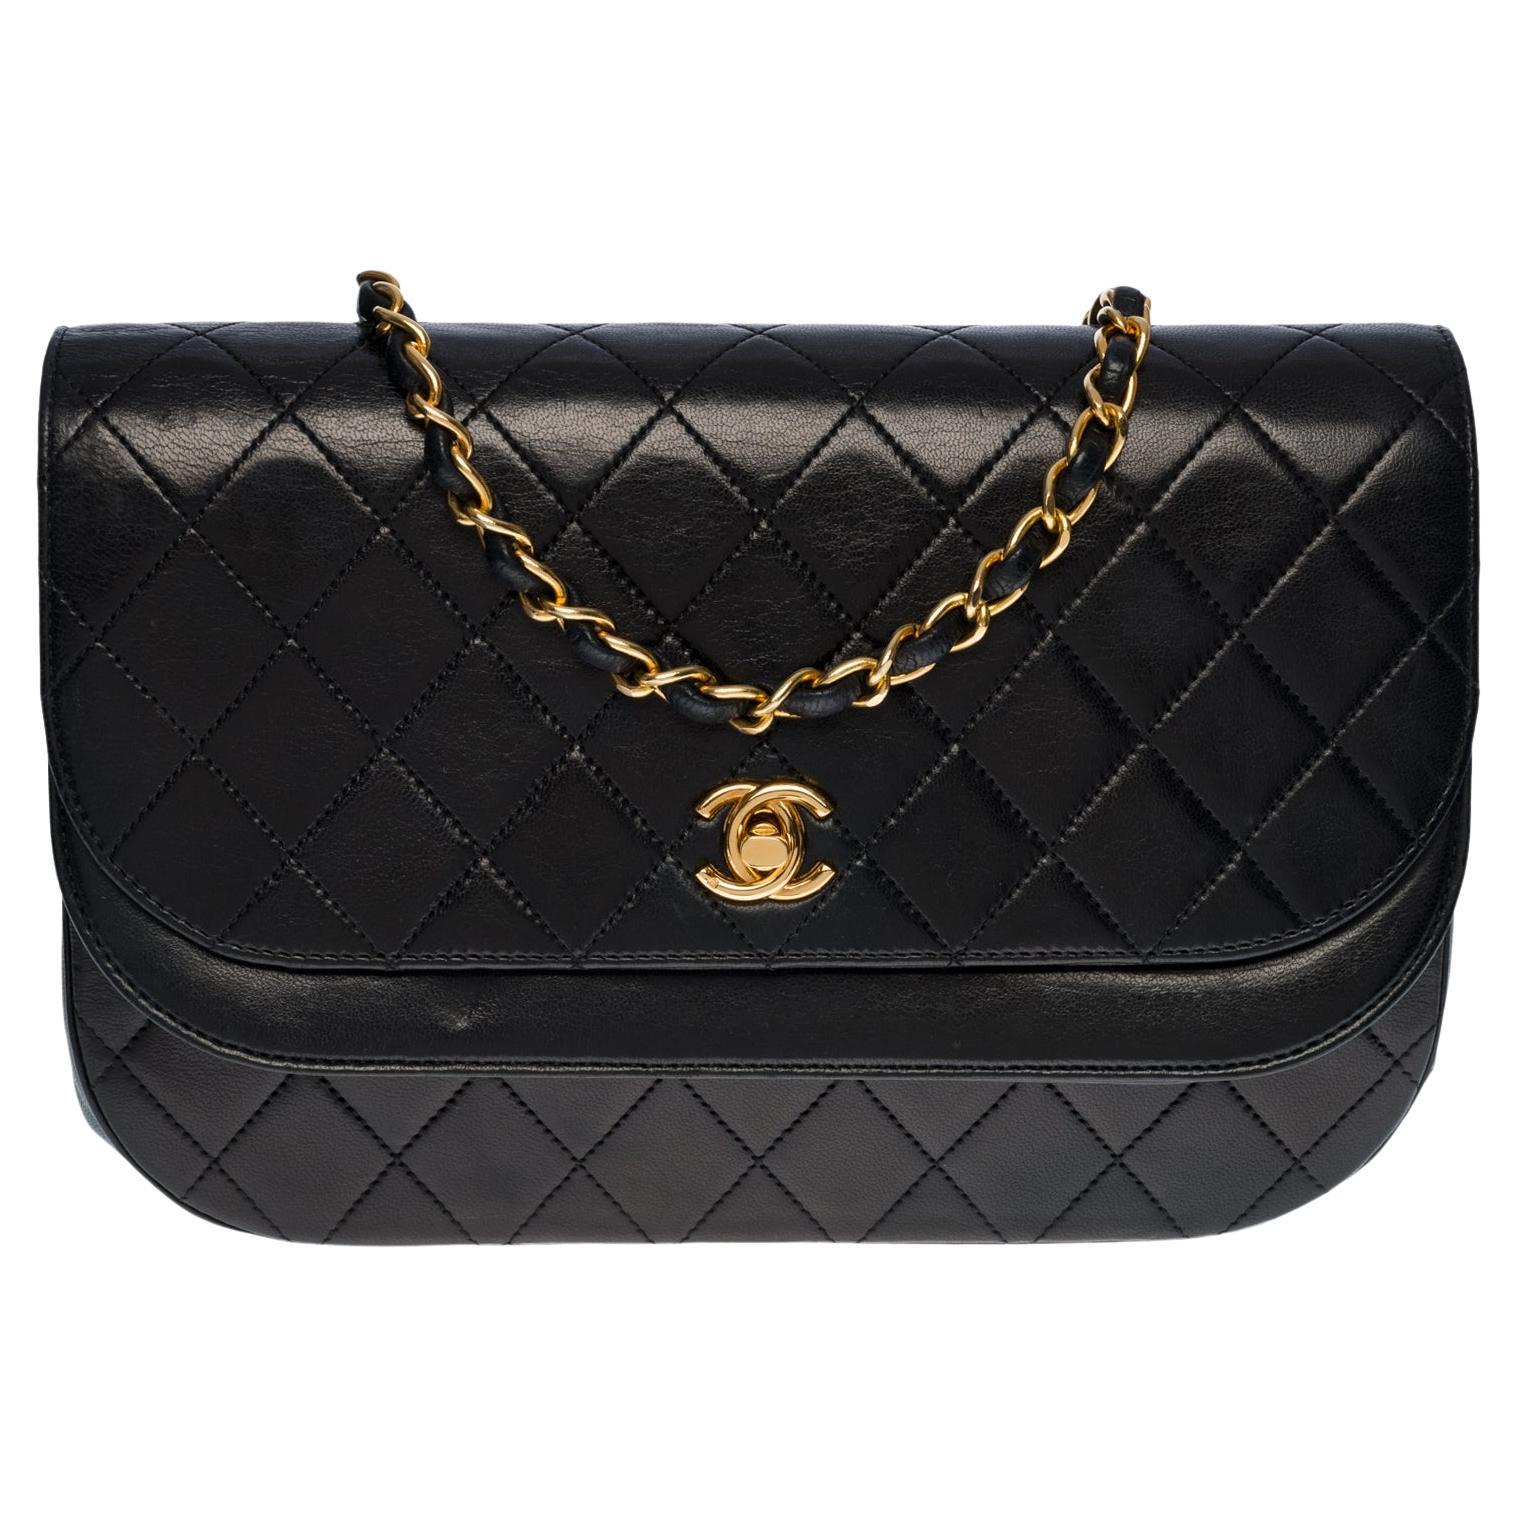 Chanel Classic Demi-Lune shoulder Flap bag in black quilted leather, GHW